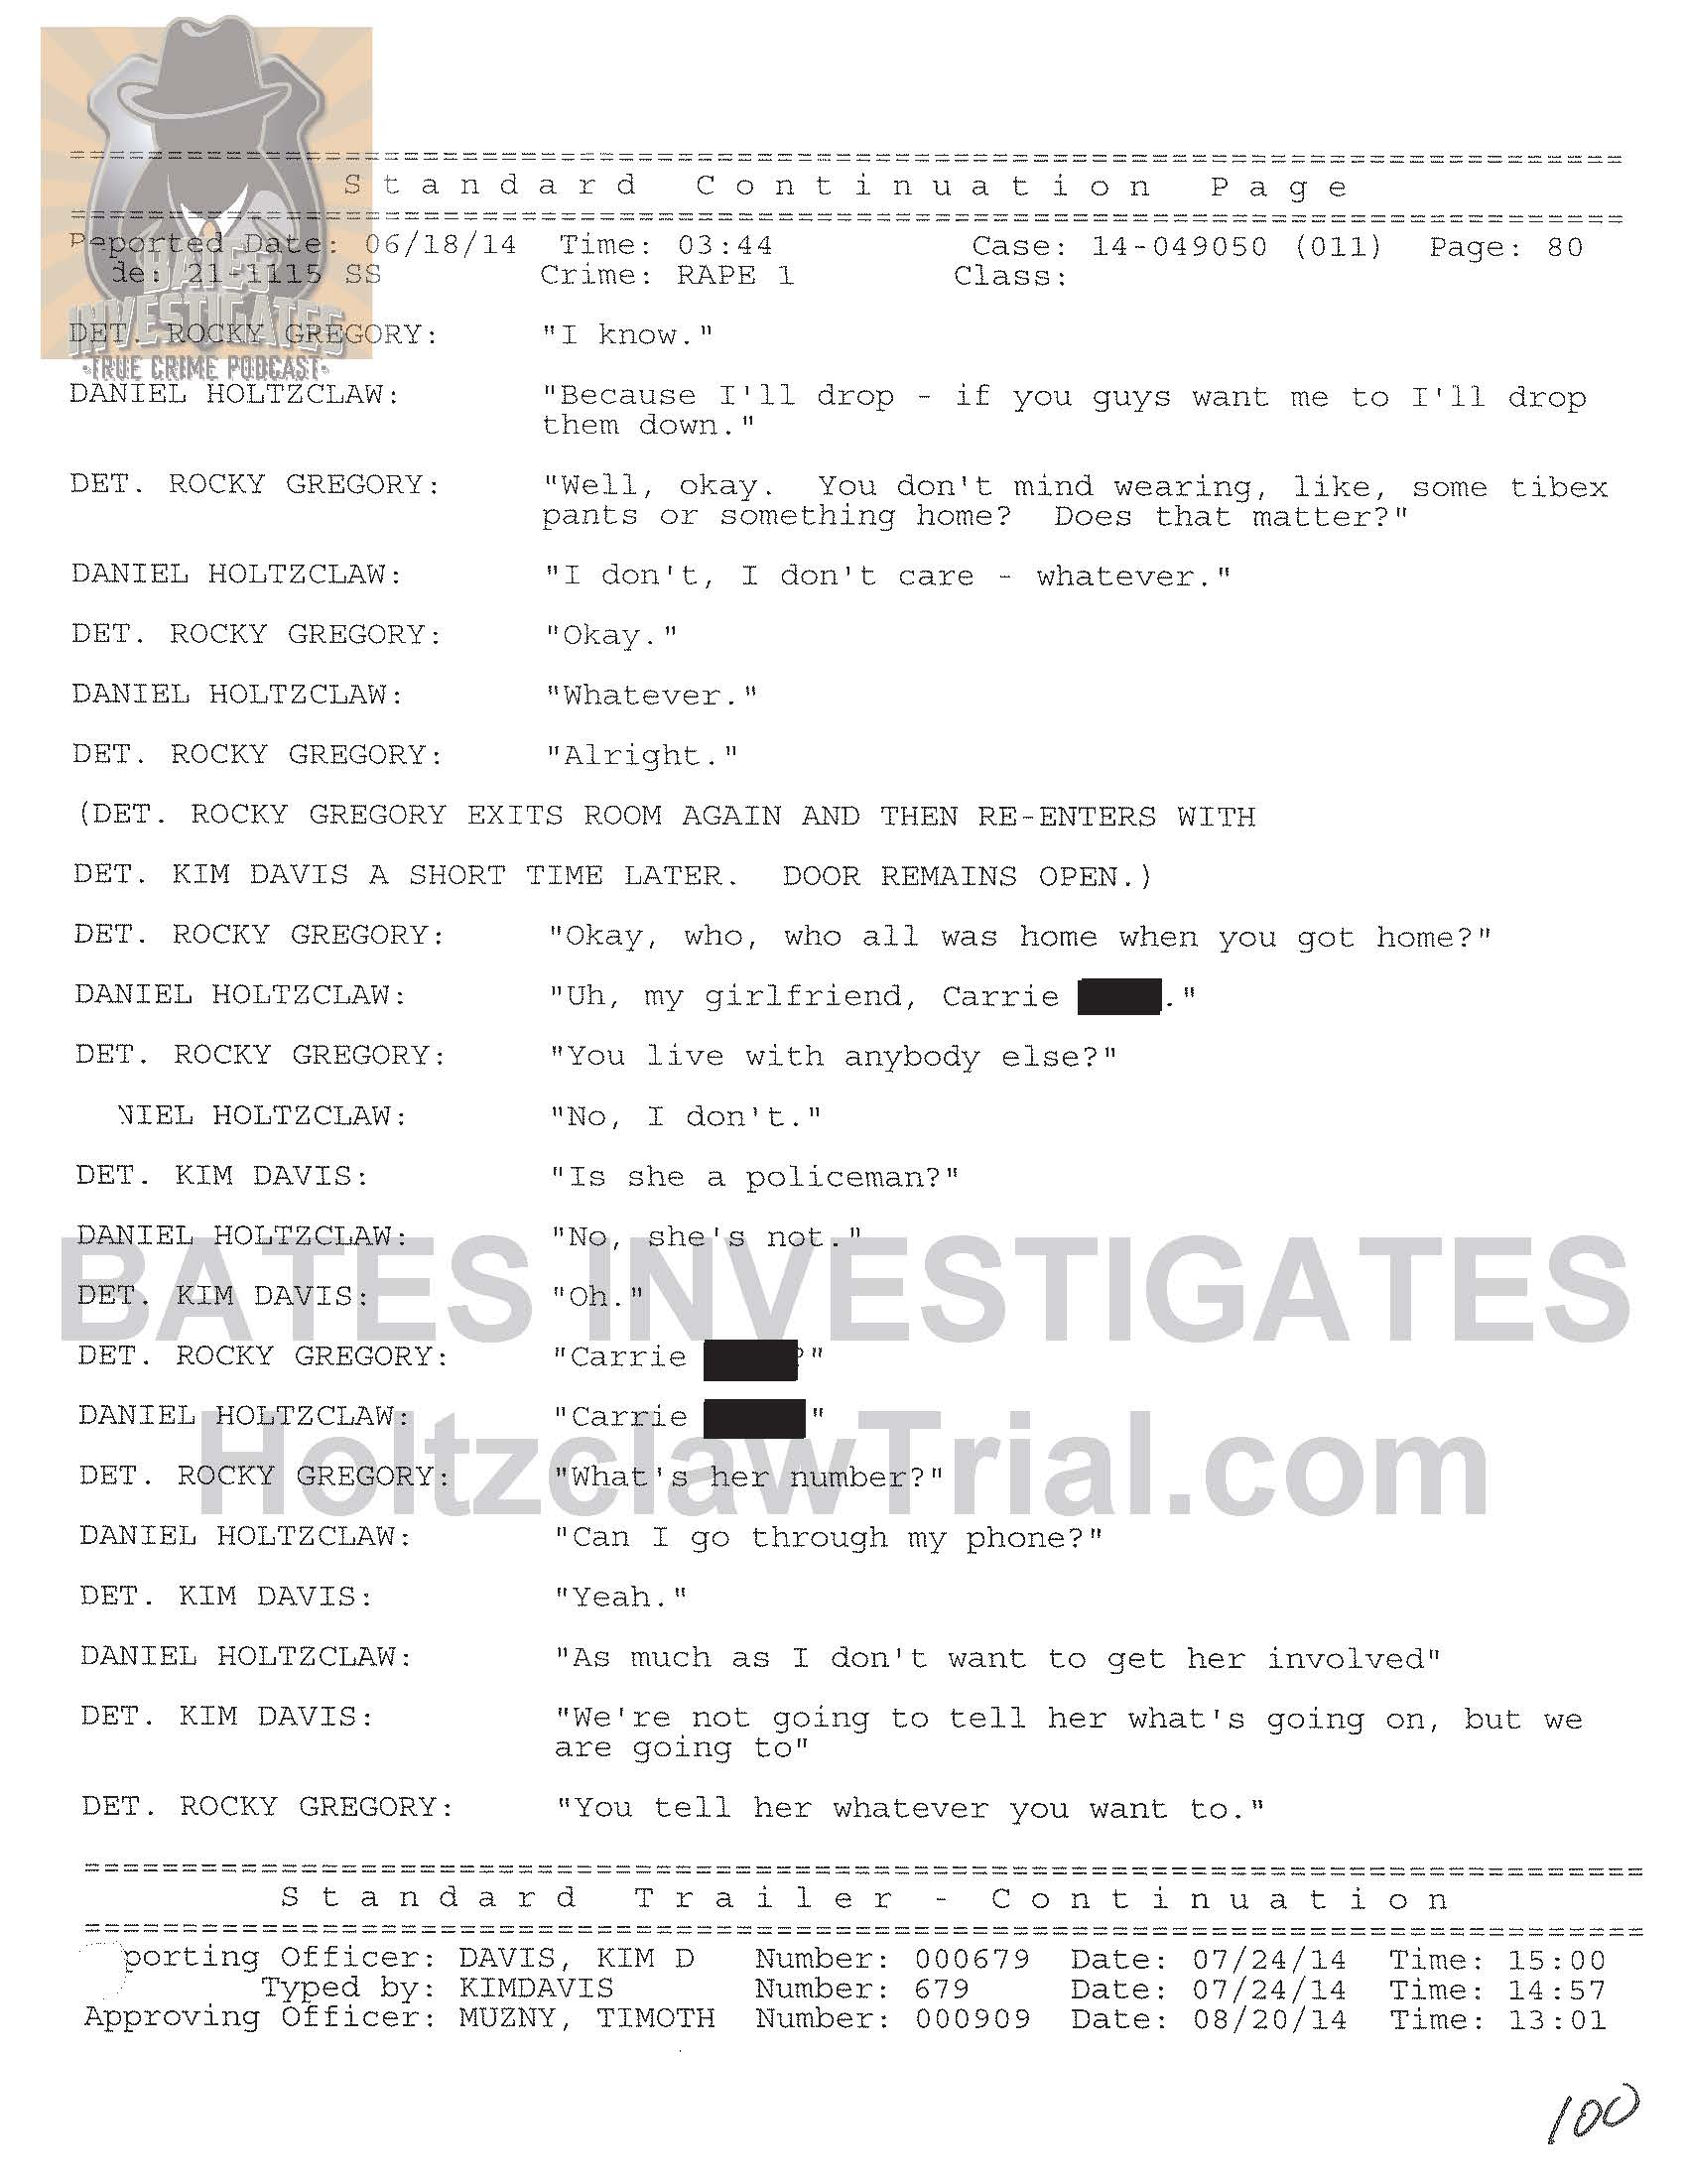 Holtzclaw Interrogation Transcript - Ep02 Redacted_Page_80.jpg